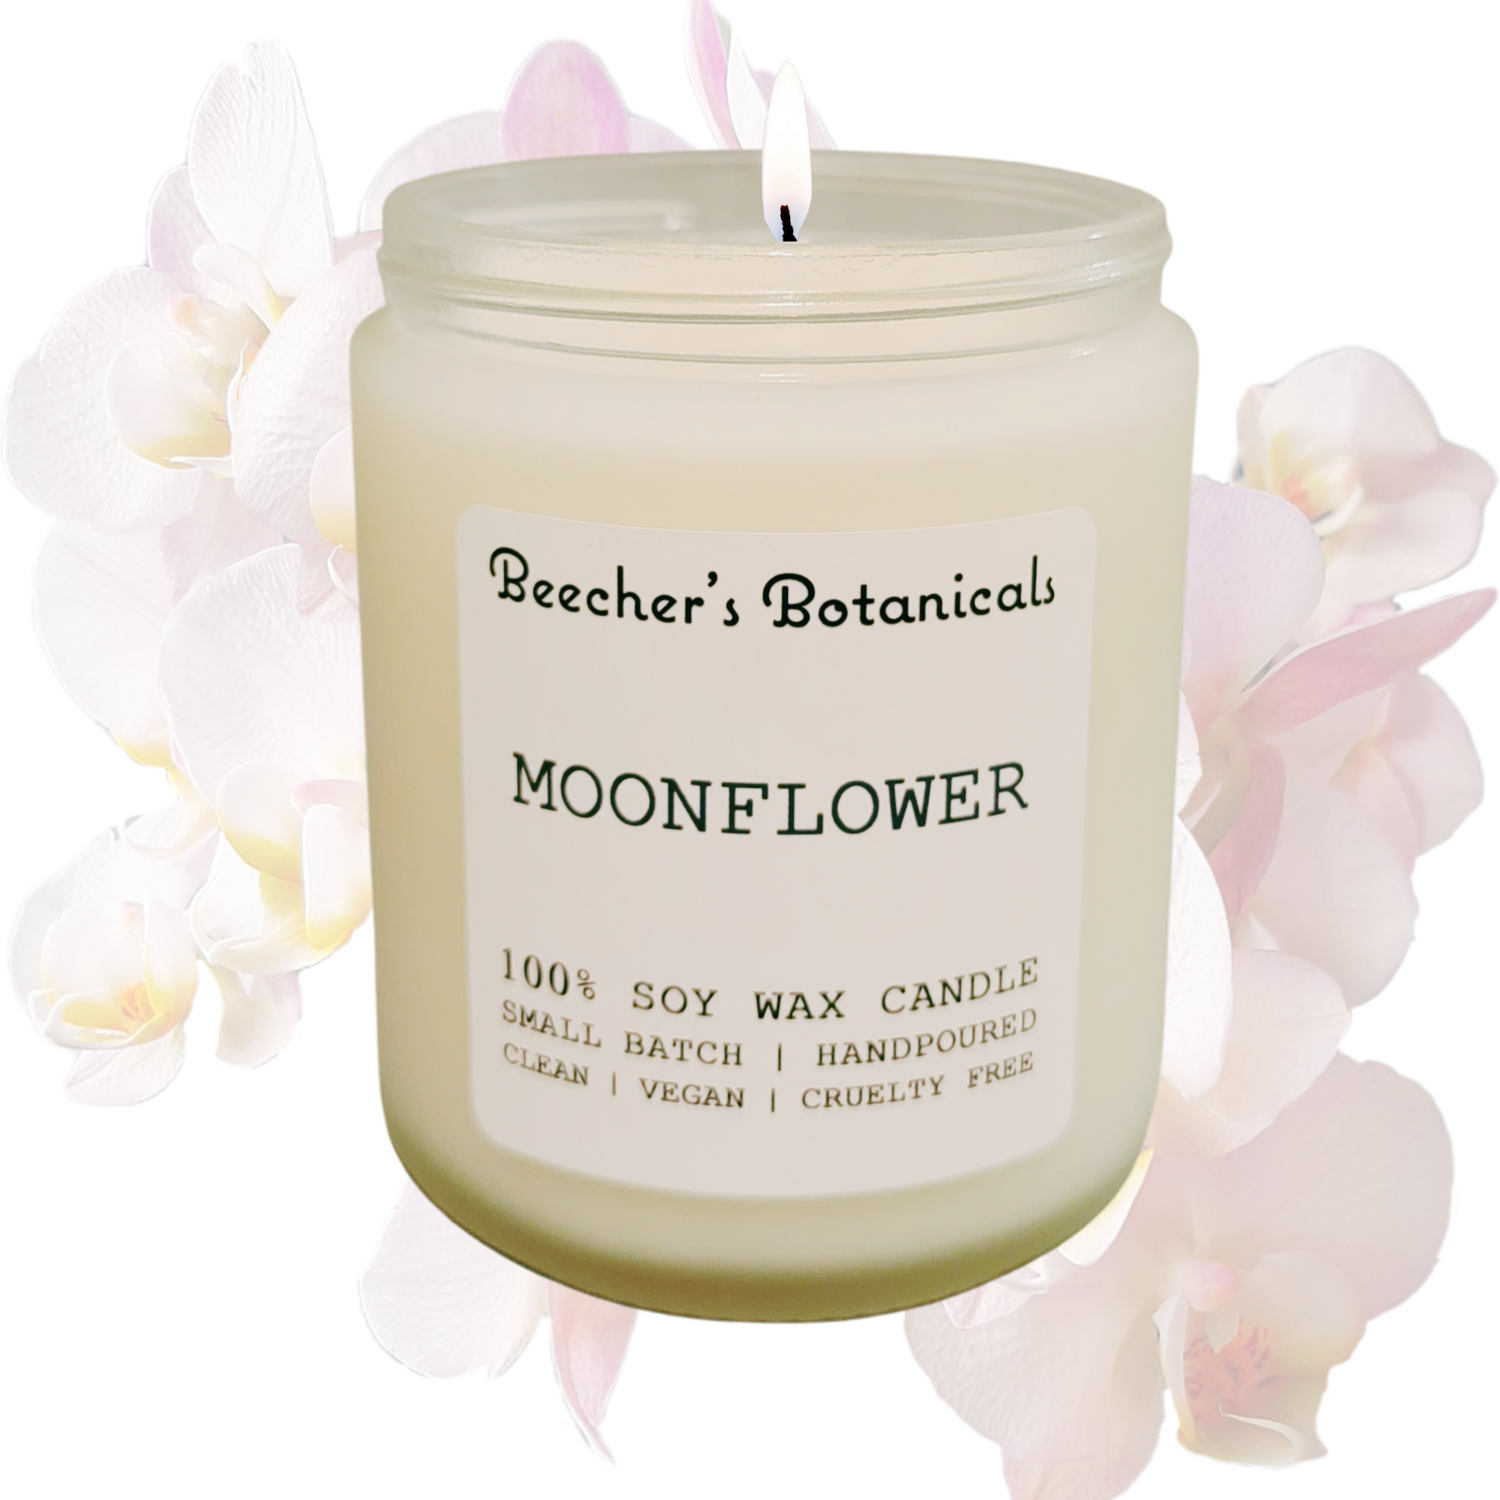 MOONFLOWER Soy Candle